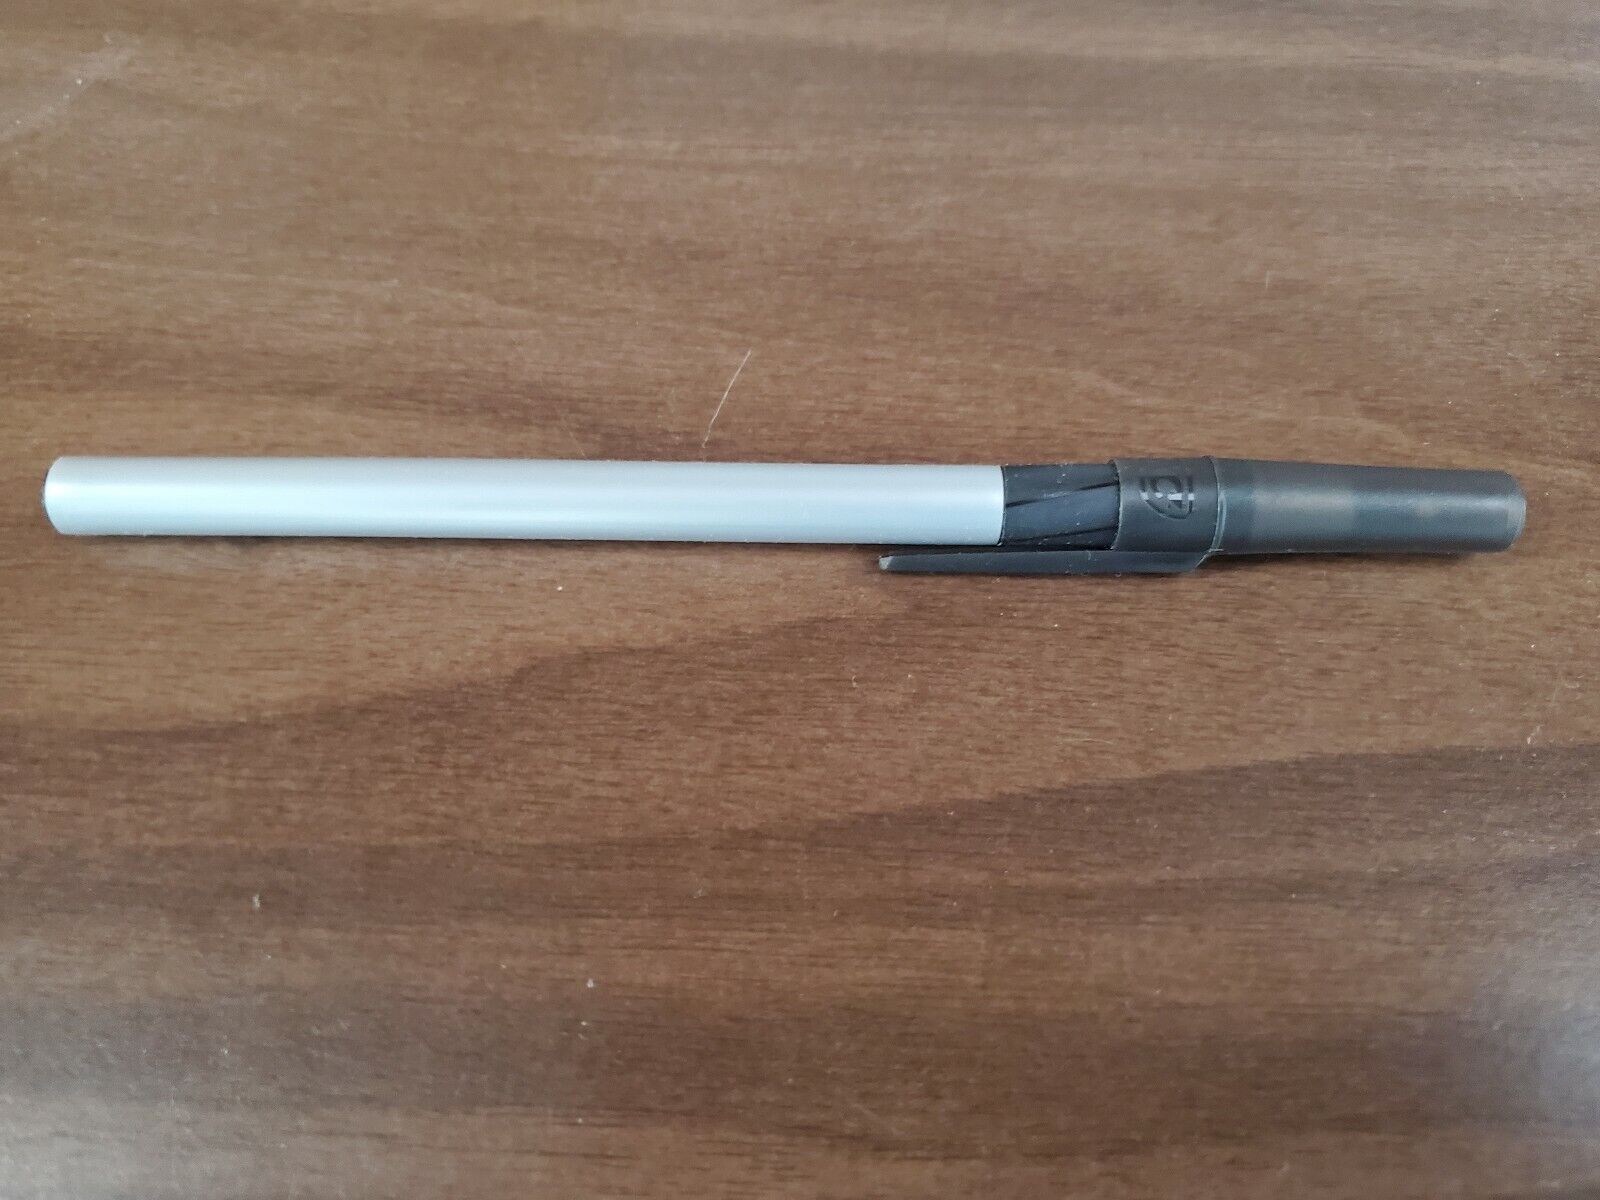 SUPER COOL bic ultra round stic grip pen USED BY YOSEPH MILLER